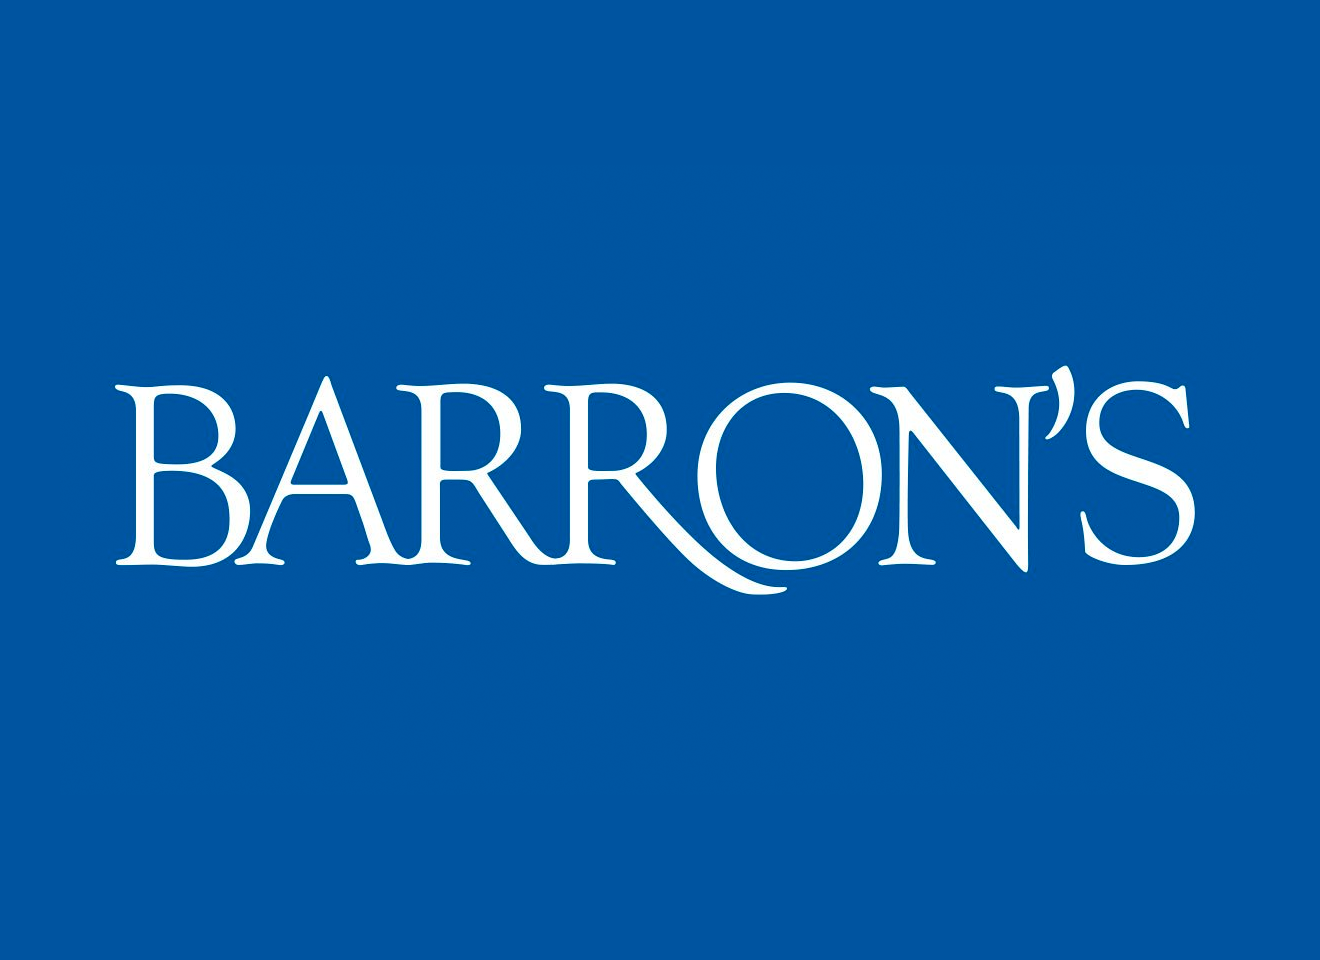 Ted Cronin Named to Barron’s “Top 100 Independent Financial Advisors” for the 17th Consecutive Year